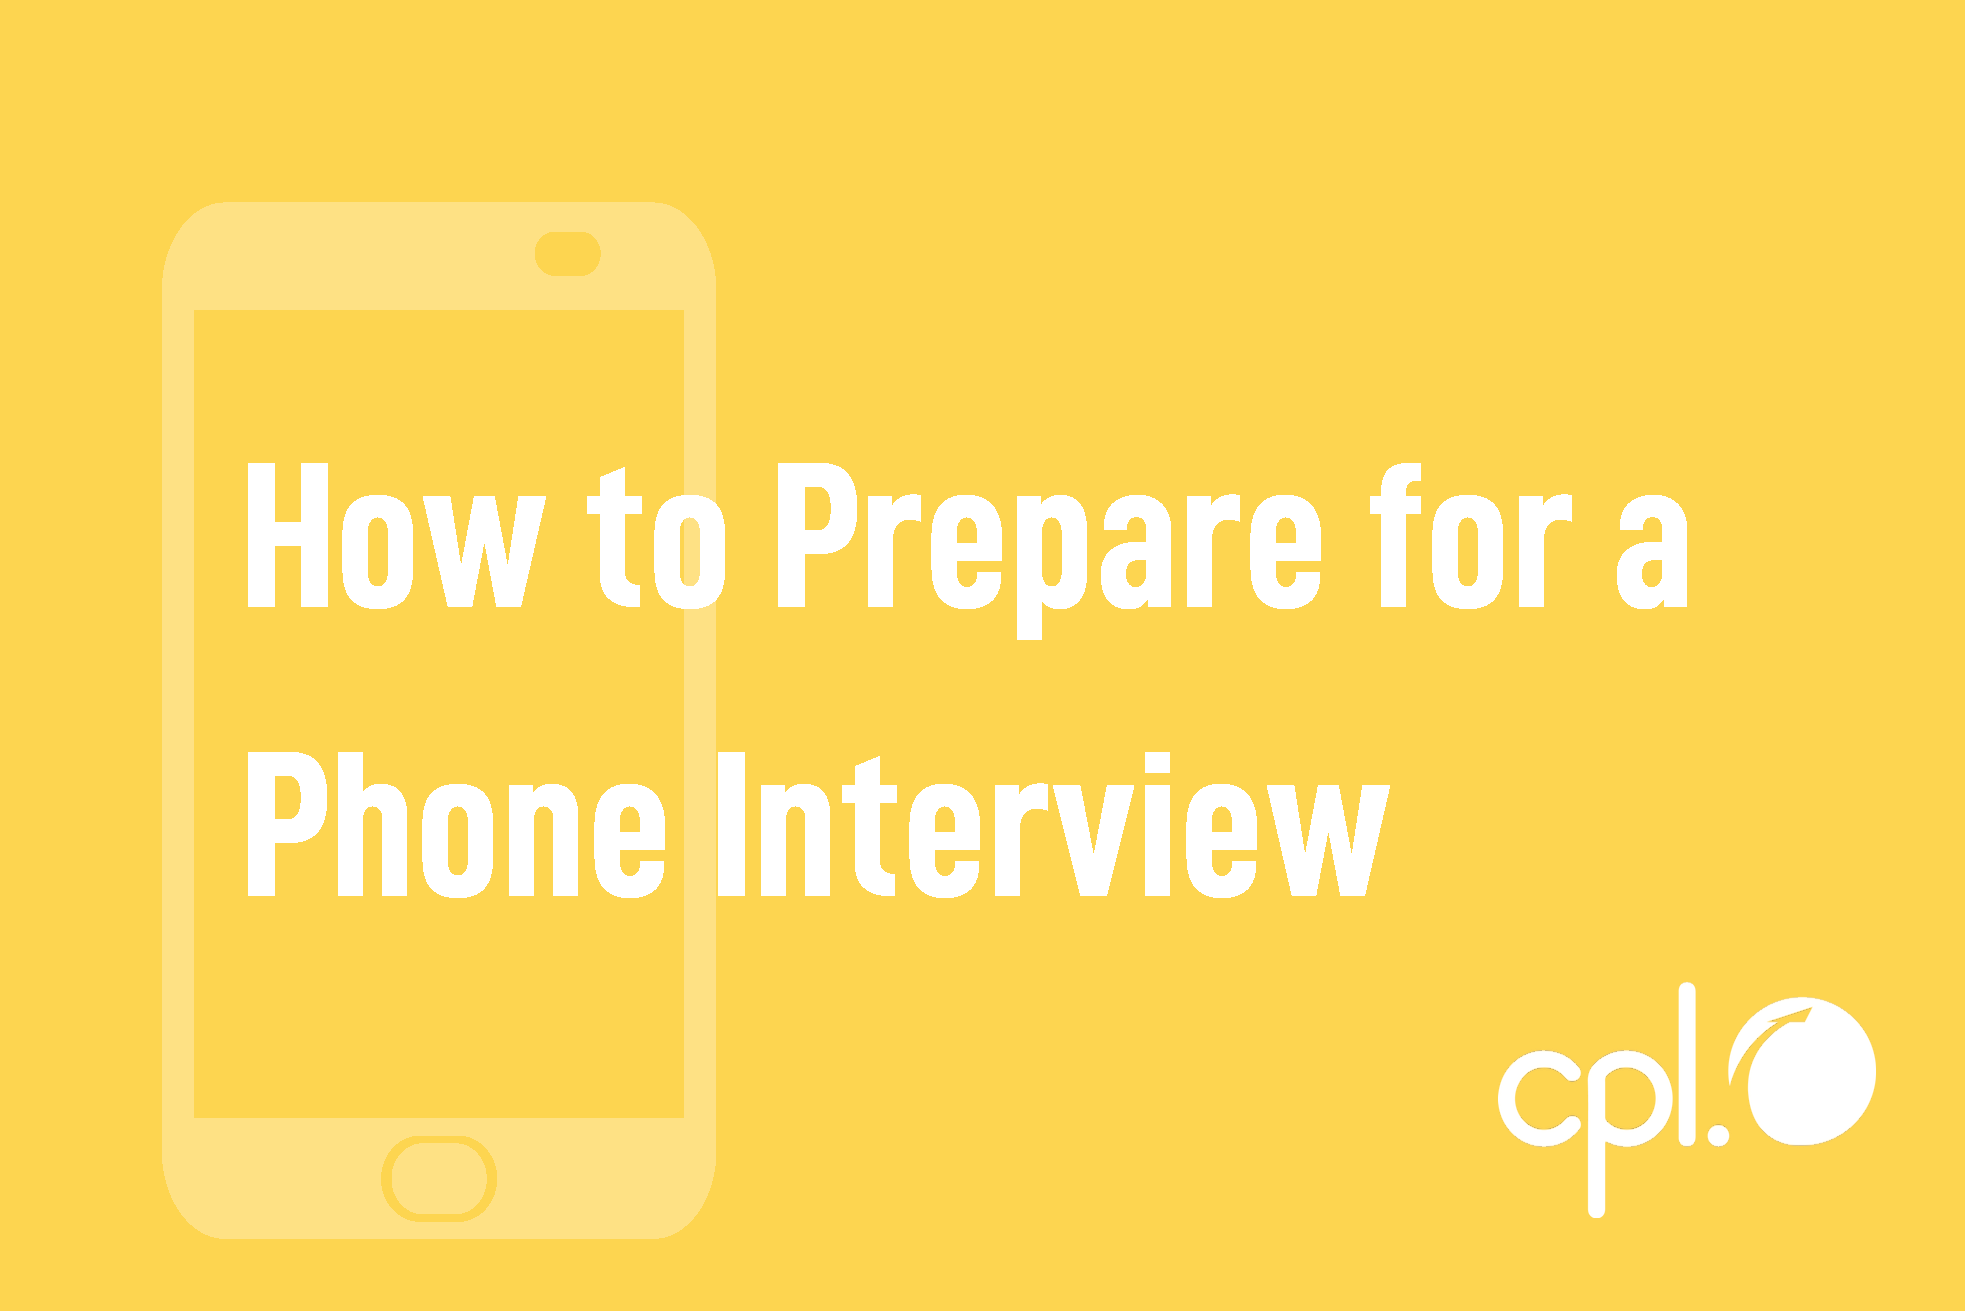 How to prepare for a phone interview graphic.